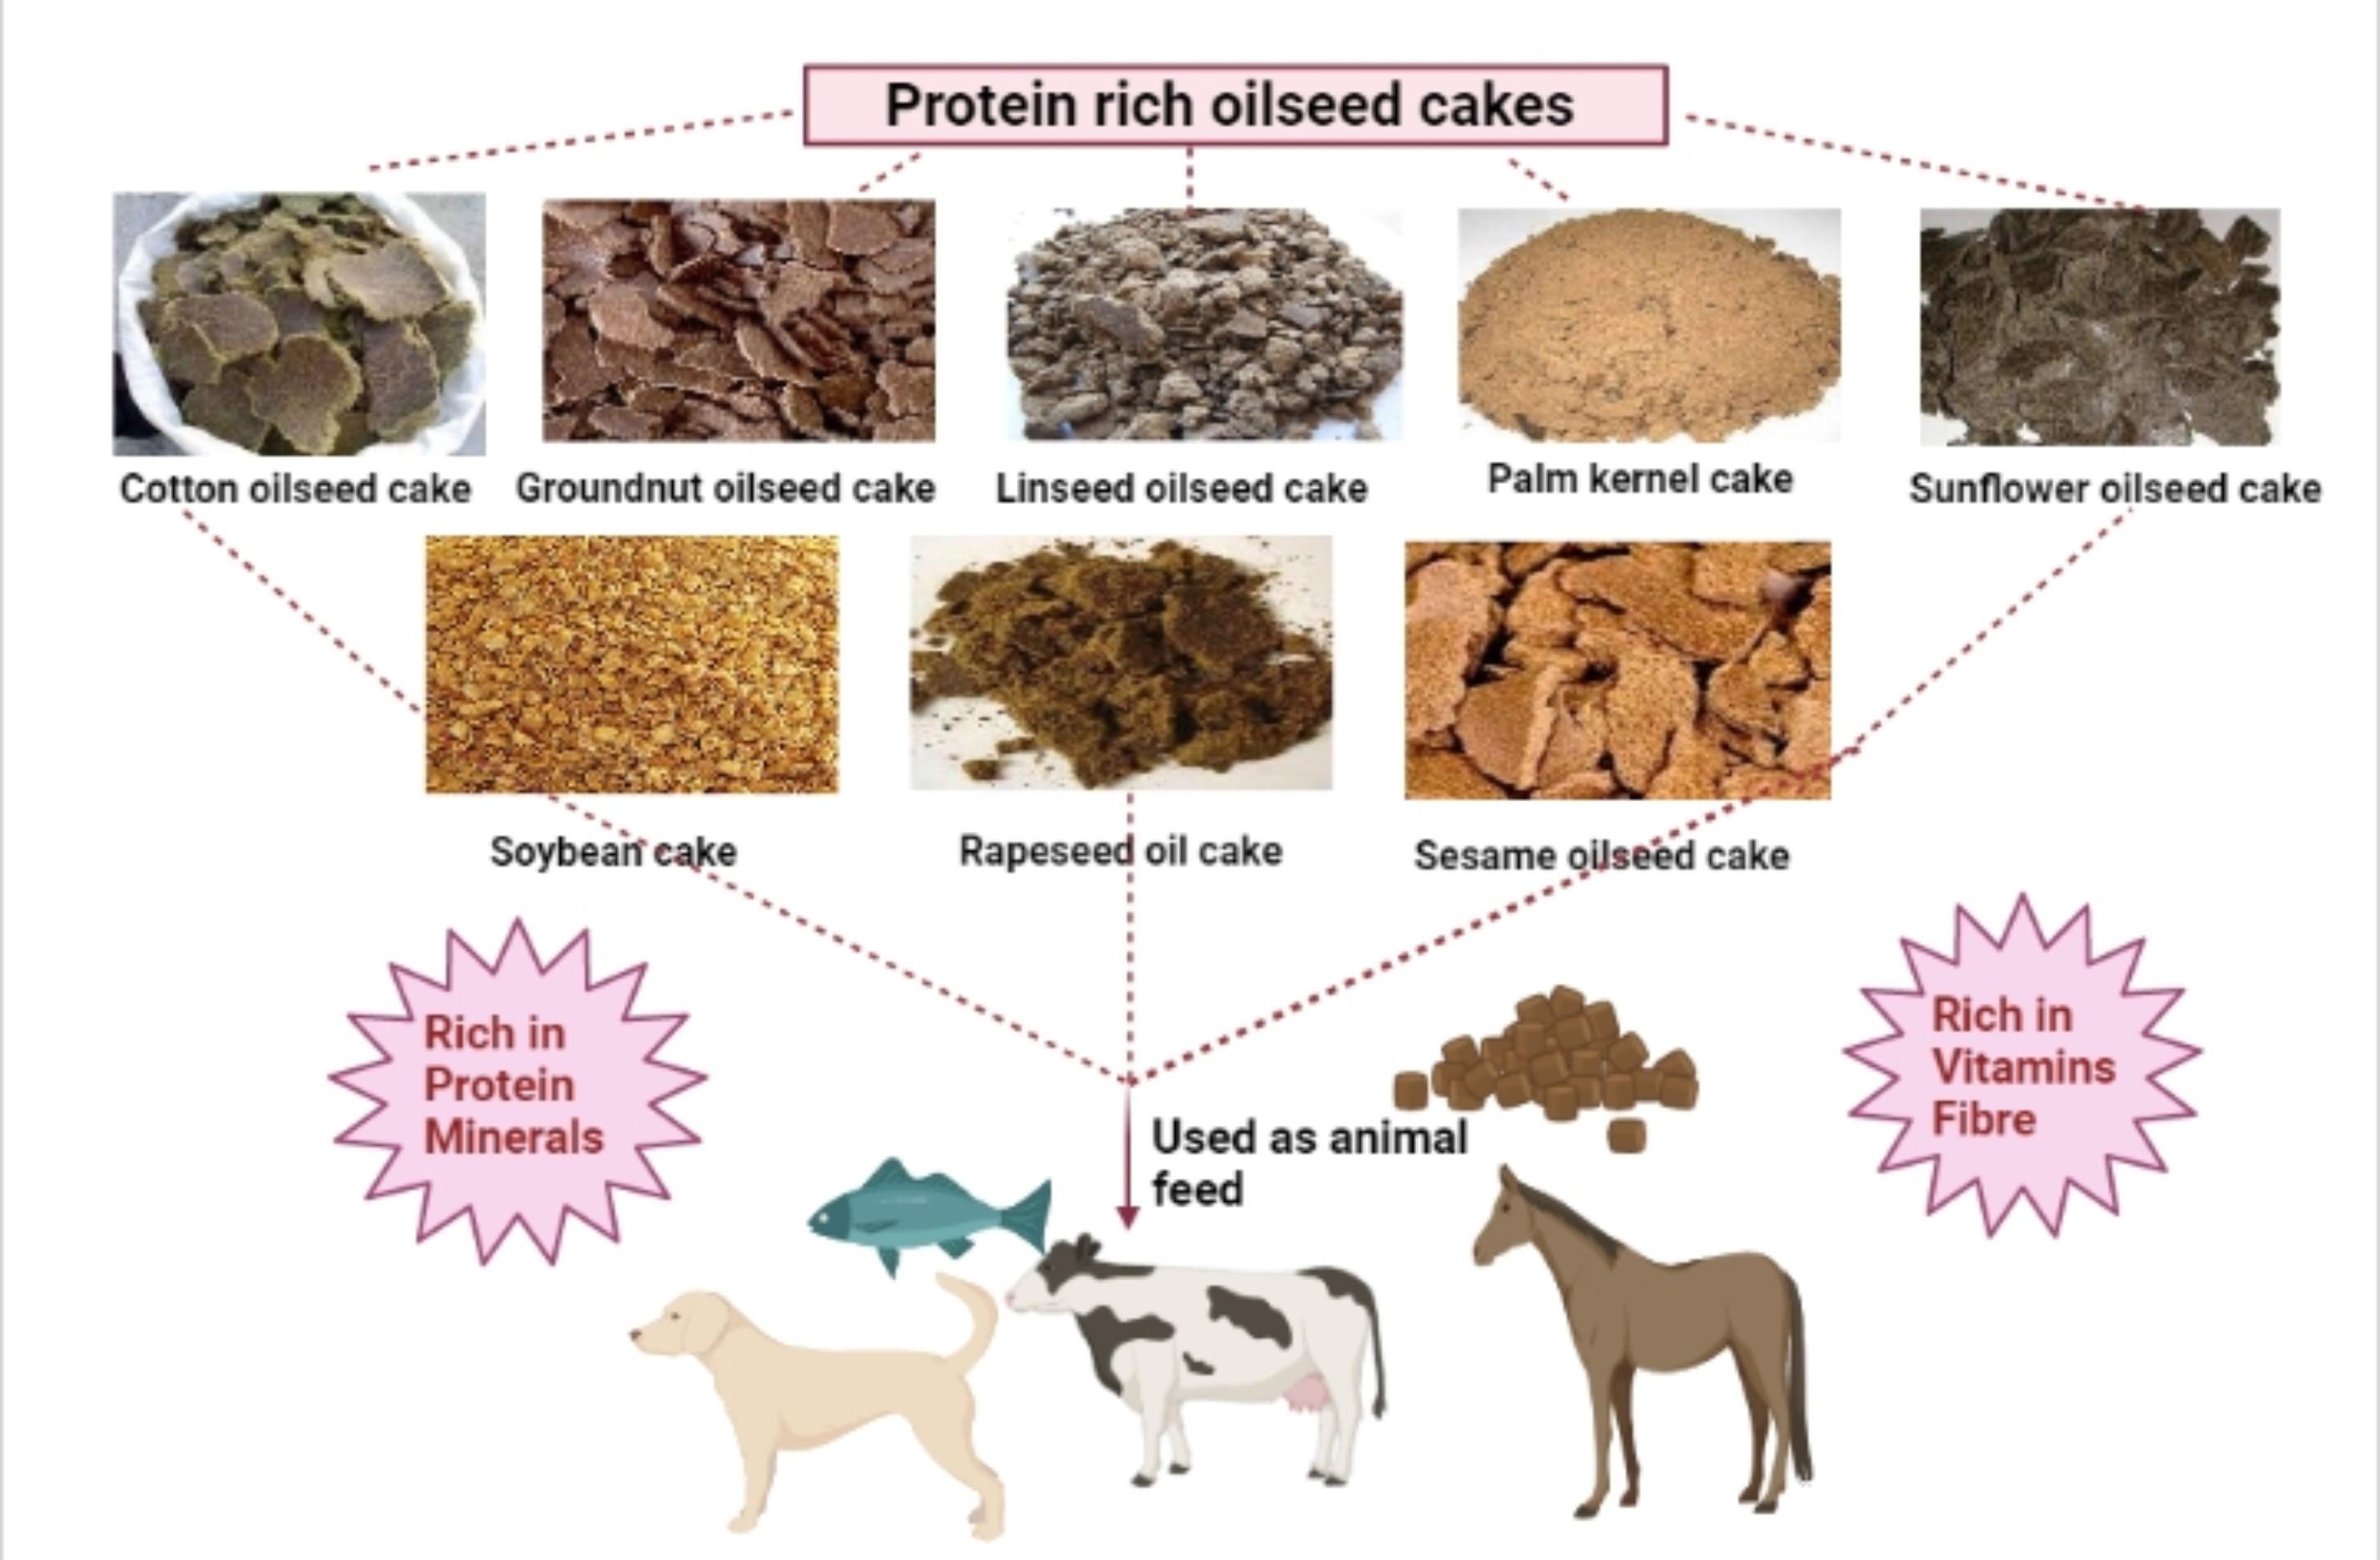 A comprehensive review on oilseed cakes and their potential as a feedstock for integrated biorefinery